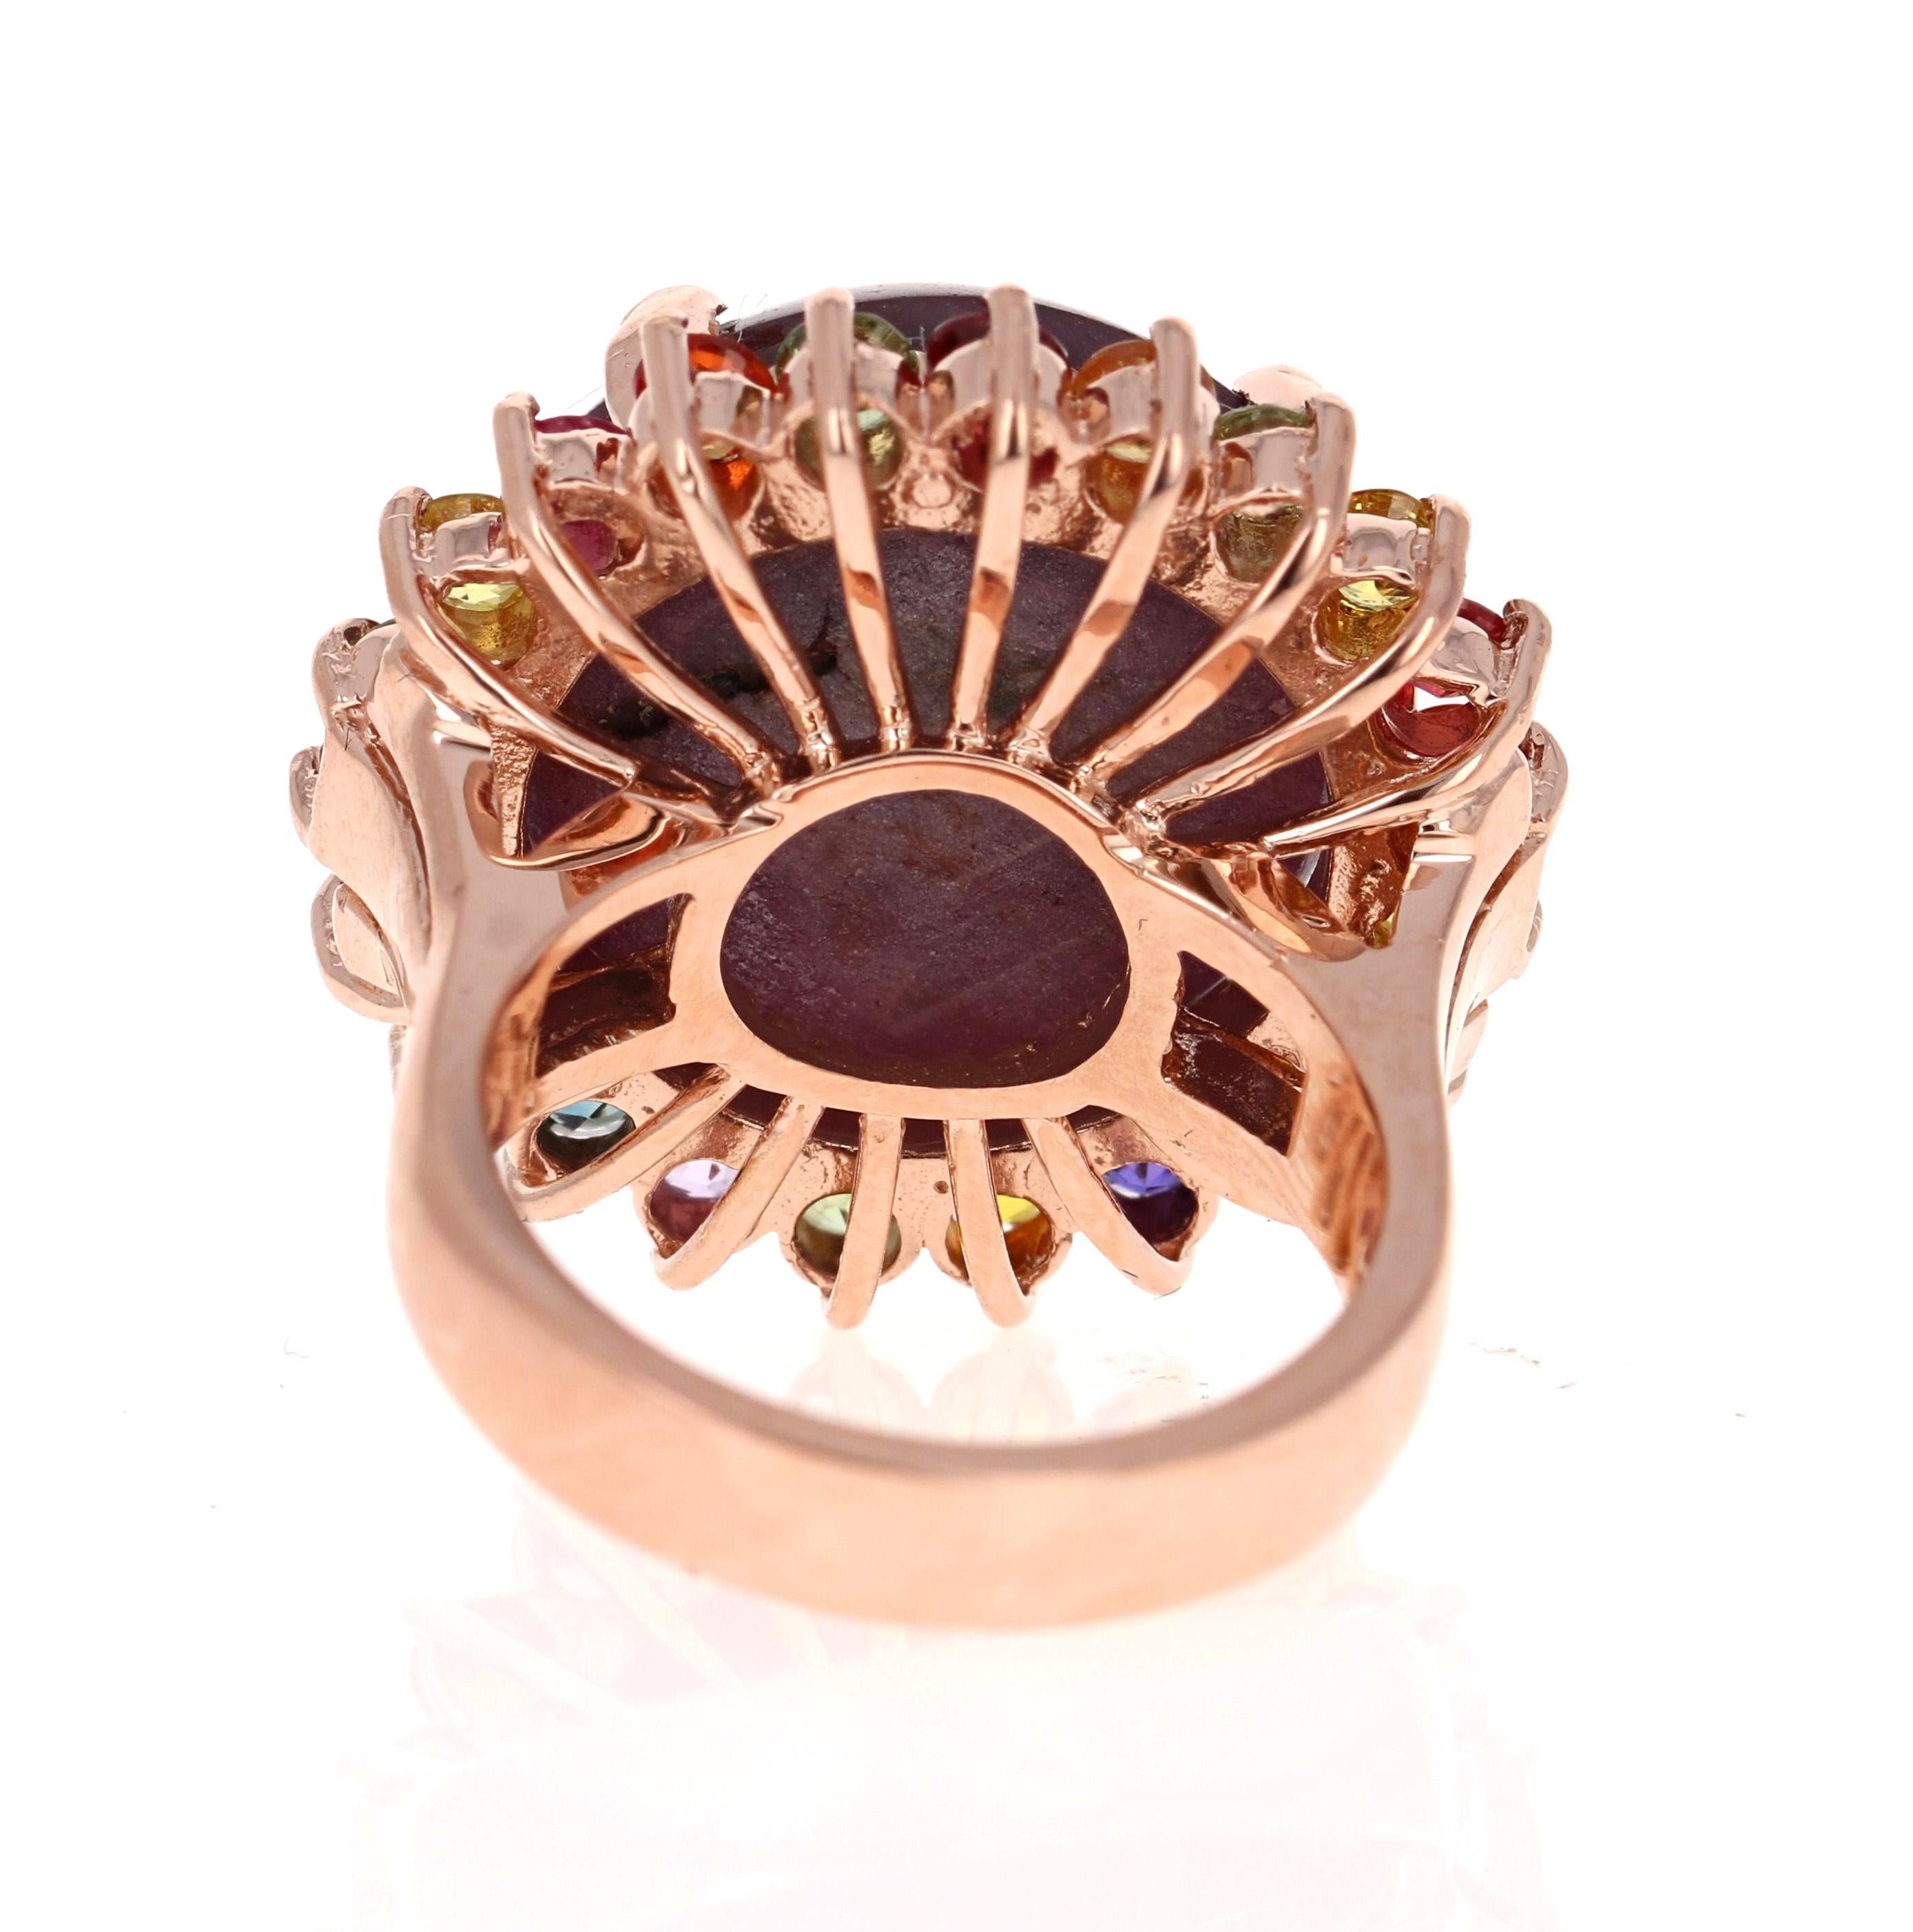 Cabochon GIA Certified 37.55 Carat Star Ruby and Sapphire 14K Rose Gold Cocktail Ring